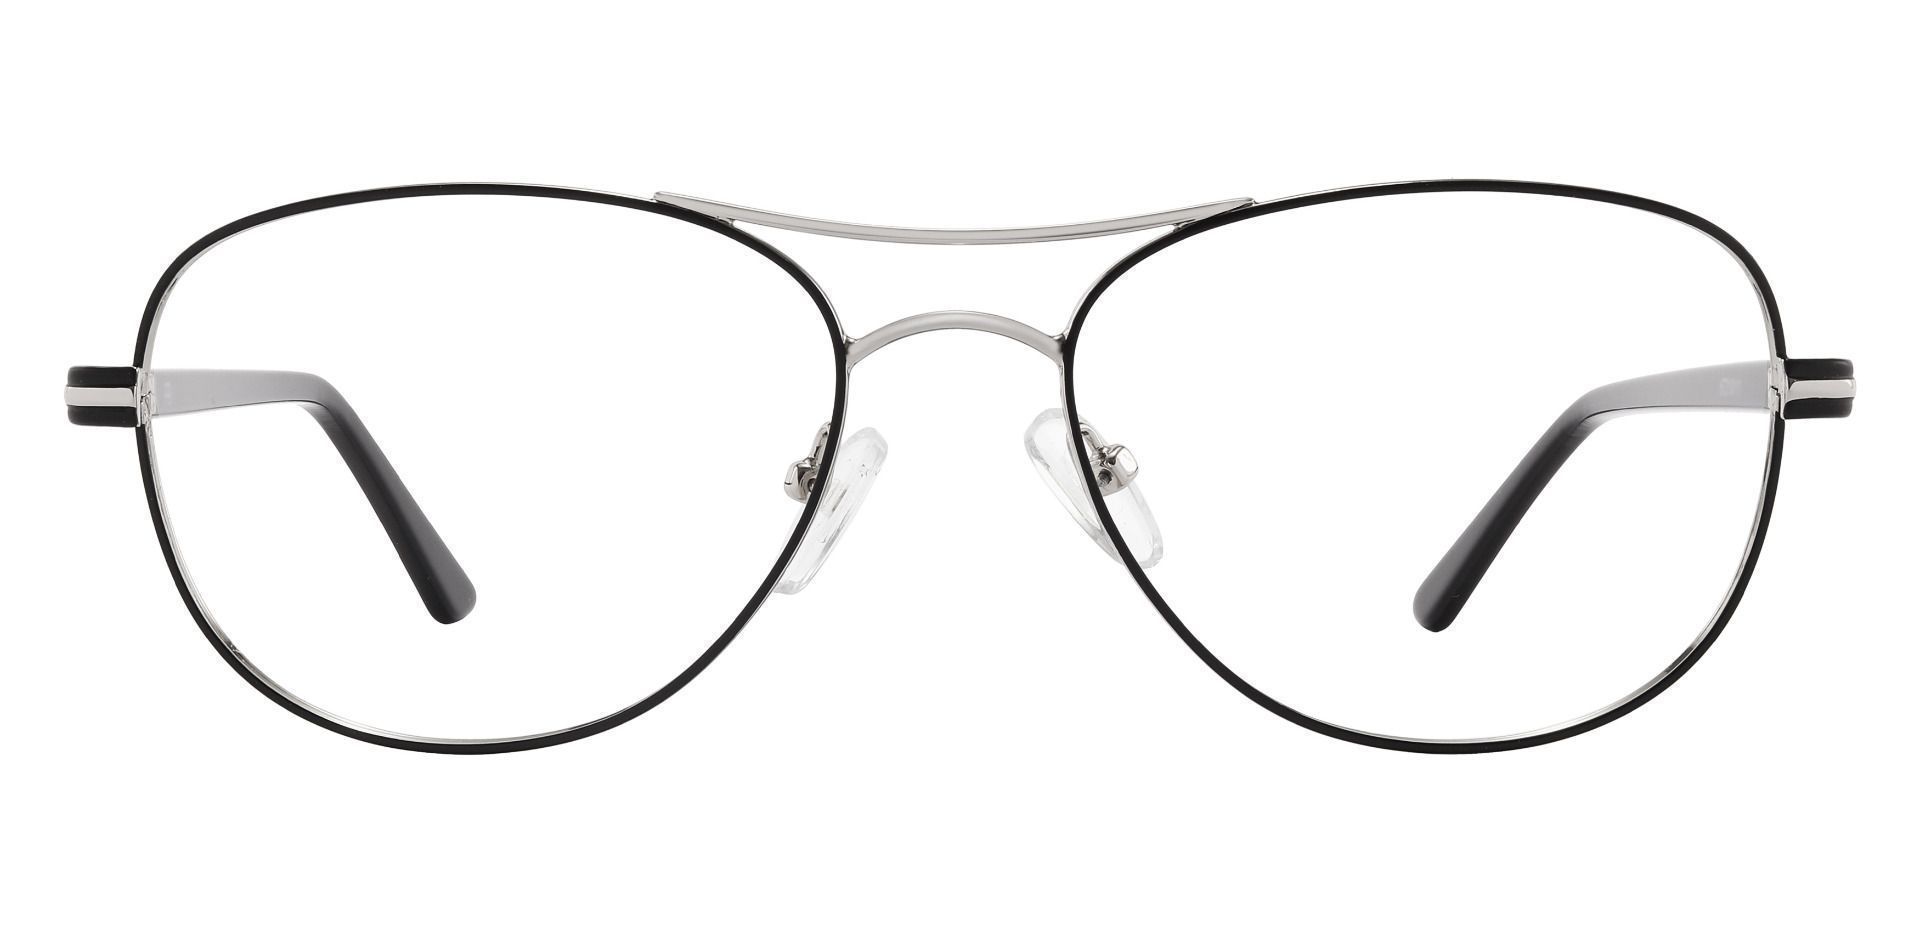 Reeves Aviator Reading Glasses - Silver